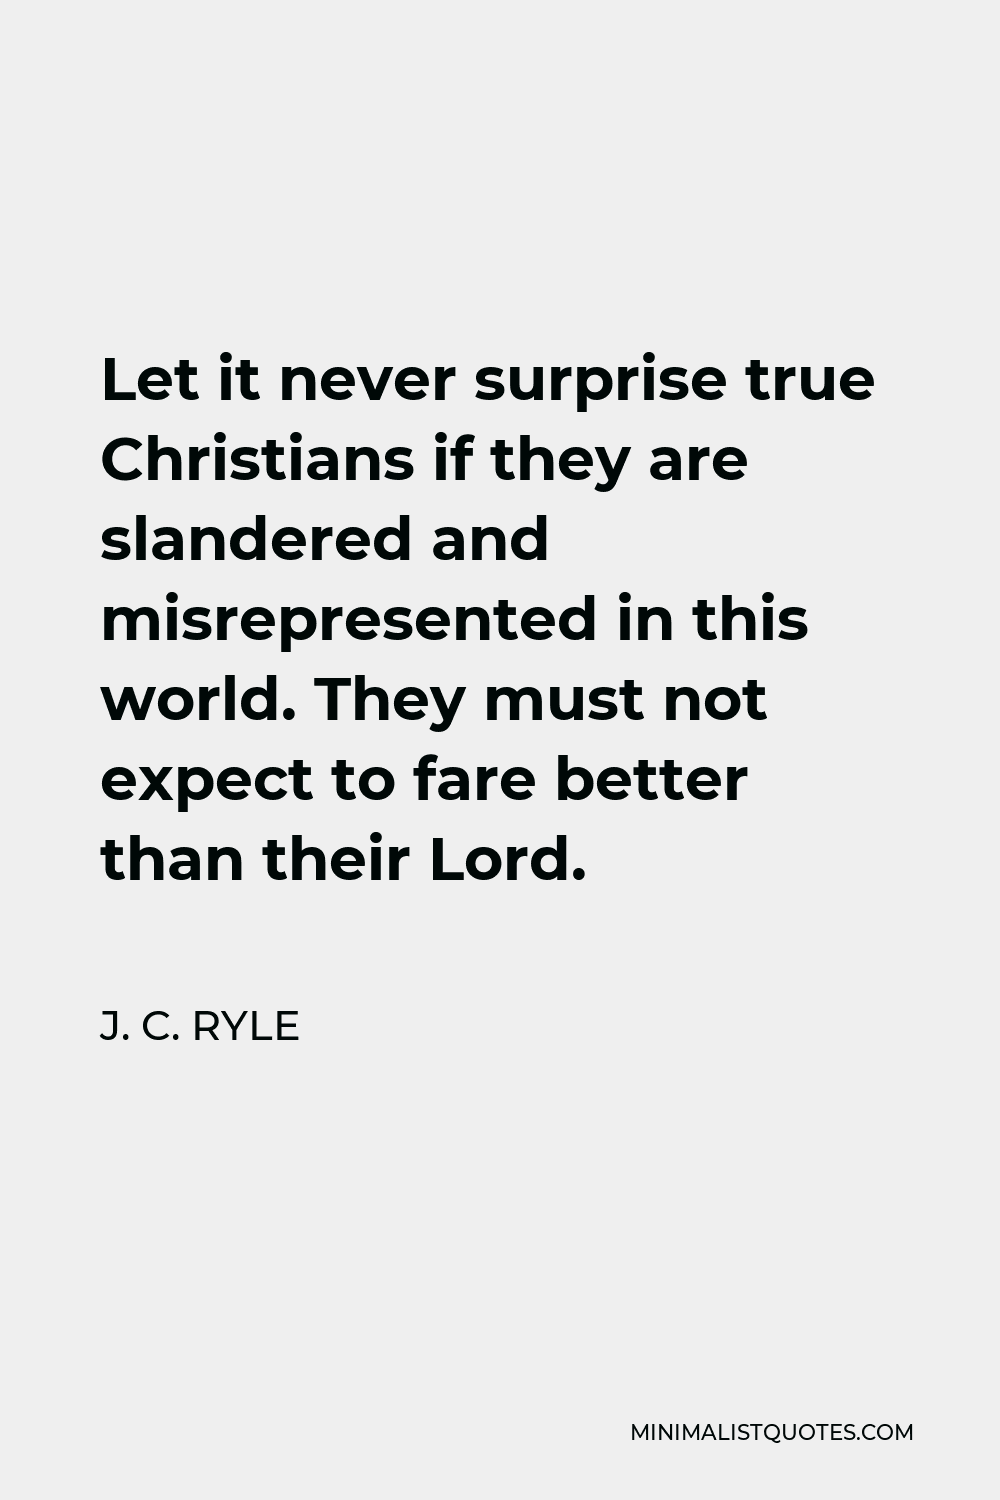 J. C. Ryle Quote - Let it never surprise true Christians if they are slandered and misrepresented in this world. They must not expect to fare better than their Lord.